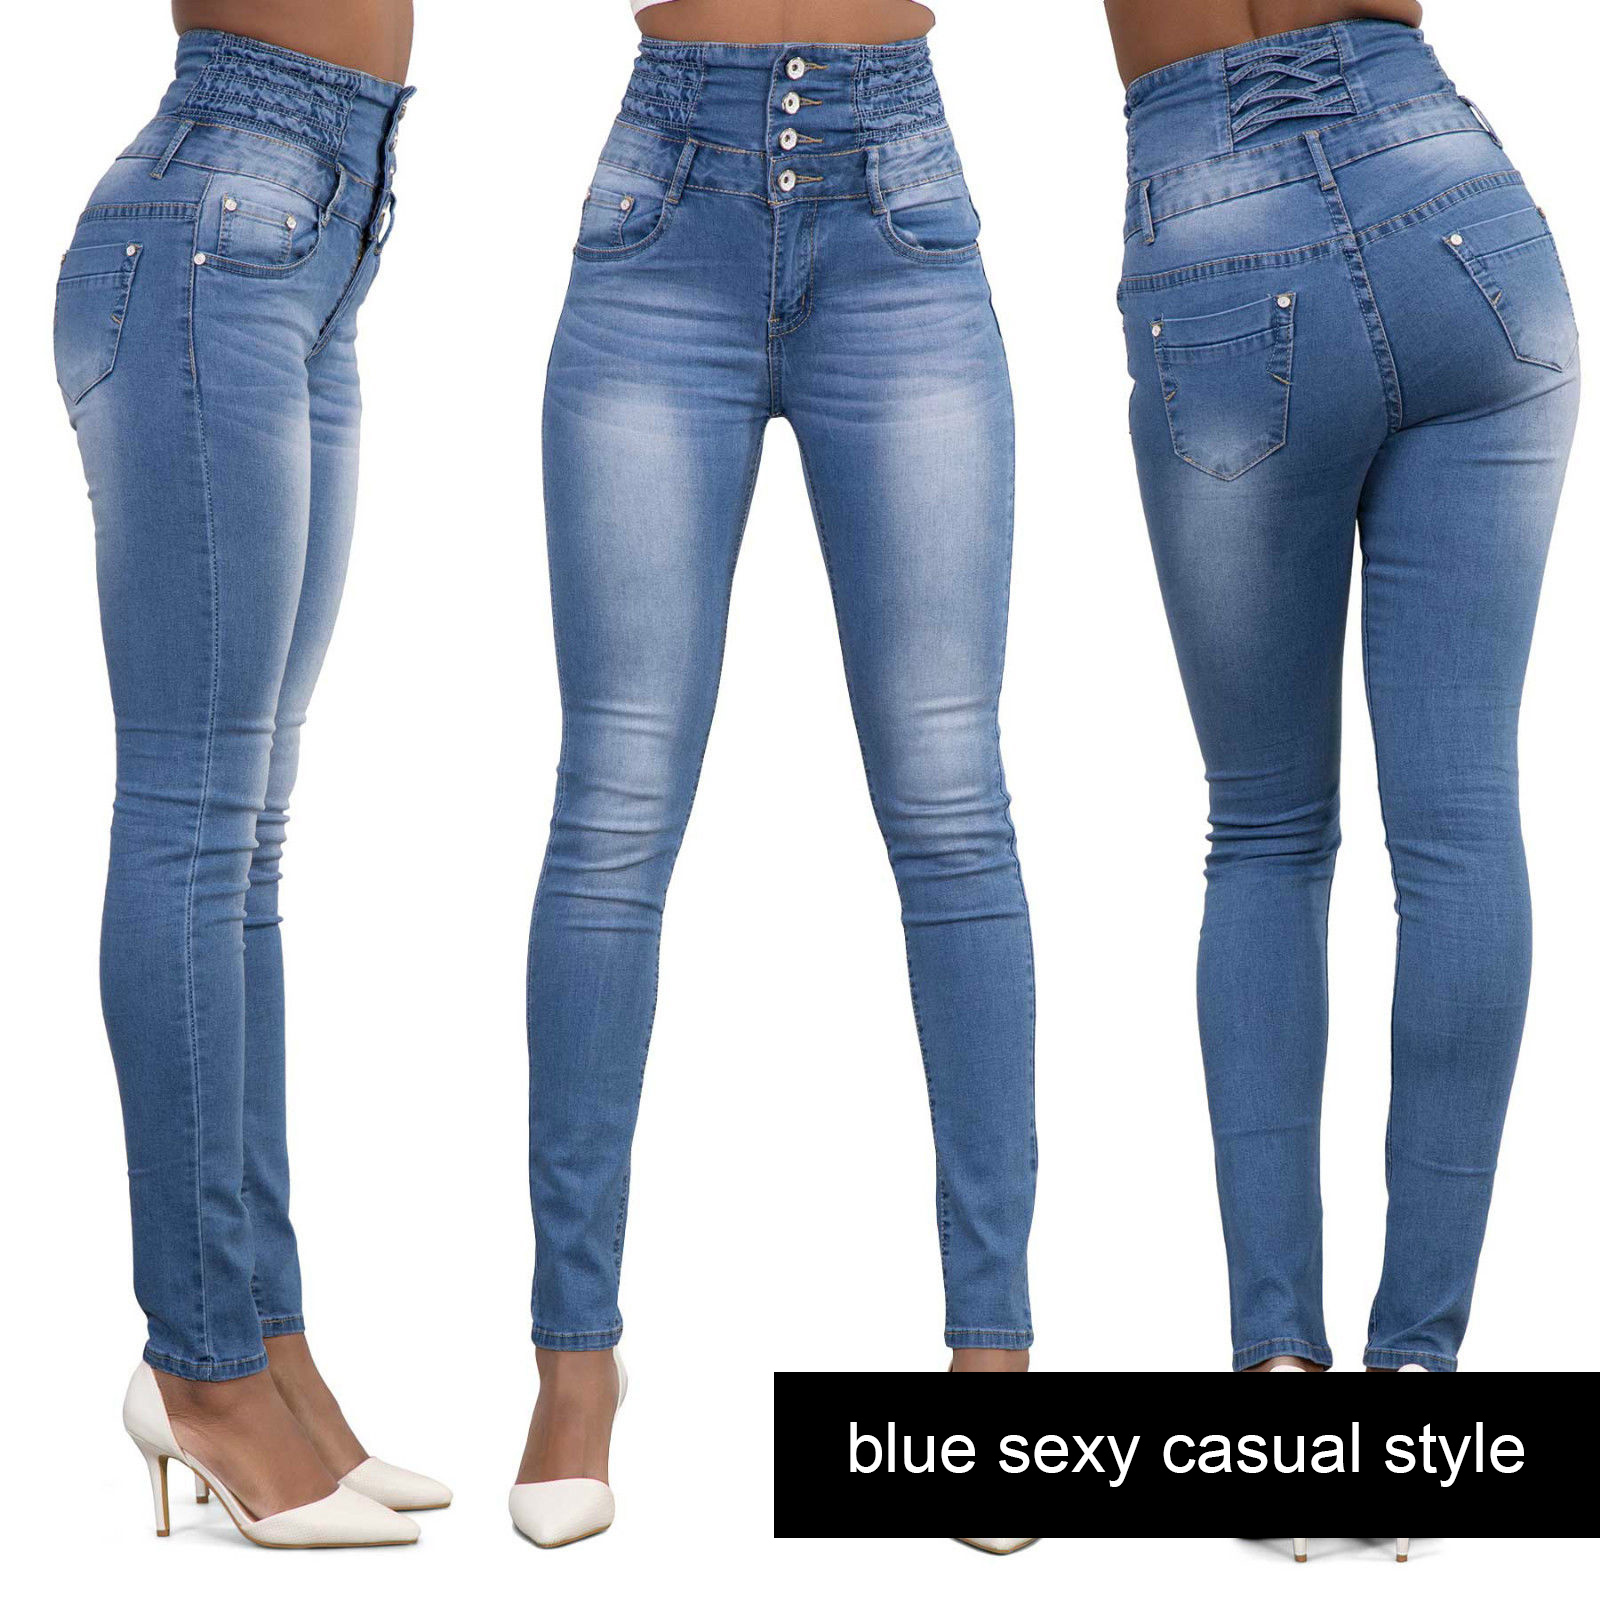 Womens Ladies High Waisted Blue Skinny Fit Jeans Stretch Denim Jegging Size 6 16 Ebay